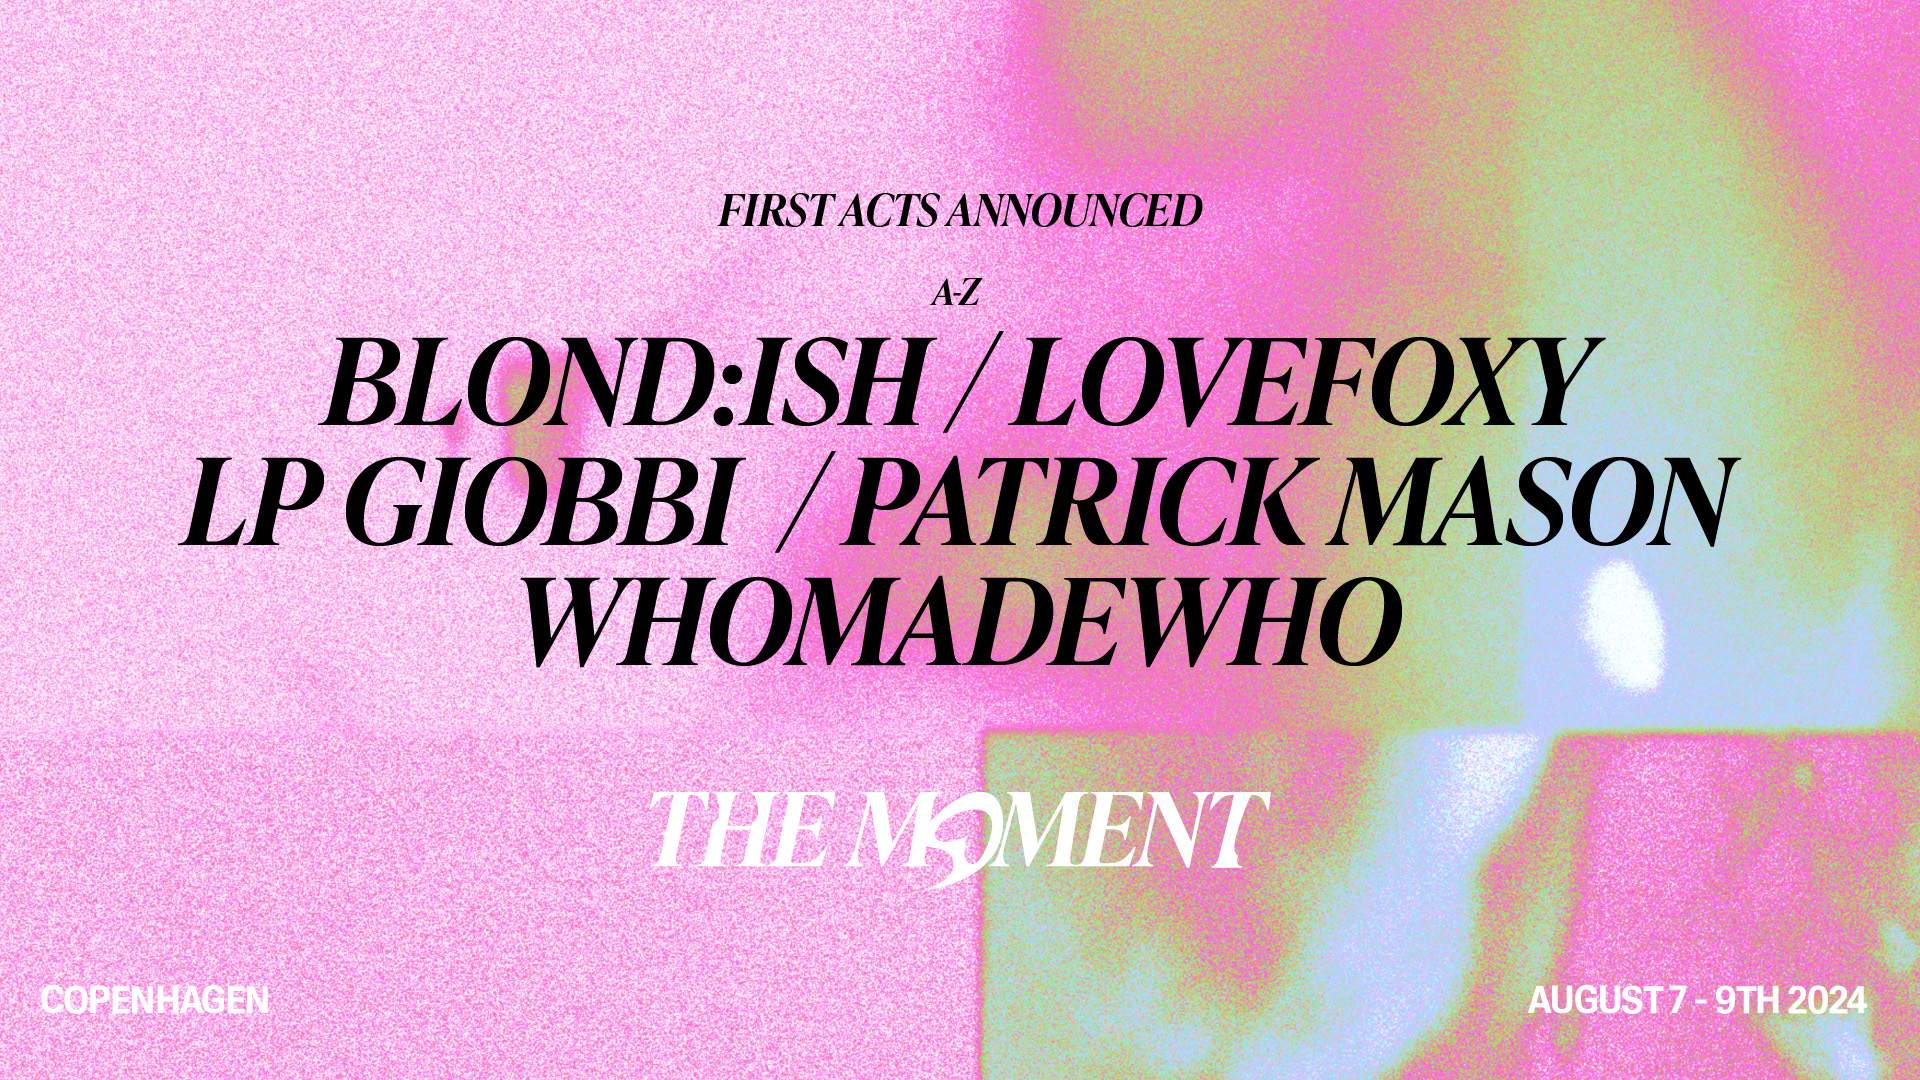 WhoMadeWho presents: THE MOMENT 7- 9TH OF AUGUST 2024 - Página trasera